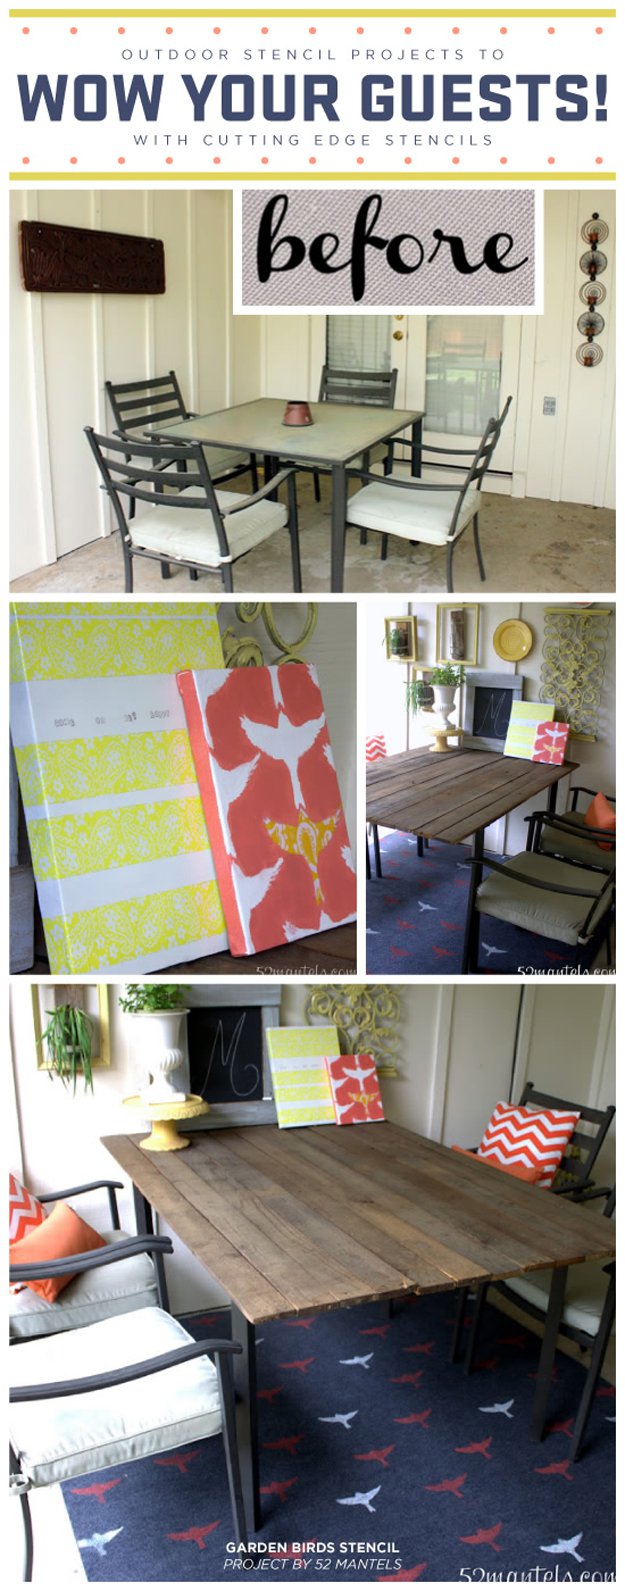 DIY Stencil Ideas to Make | diyprojects.com/26-best-stencils-for-home-decor/